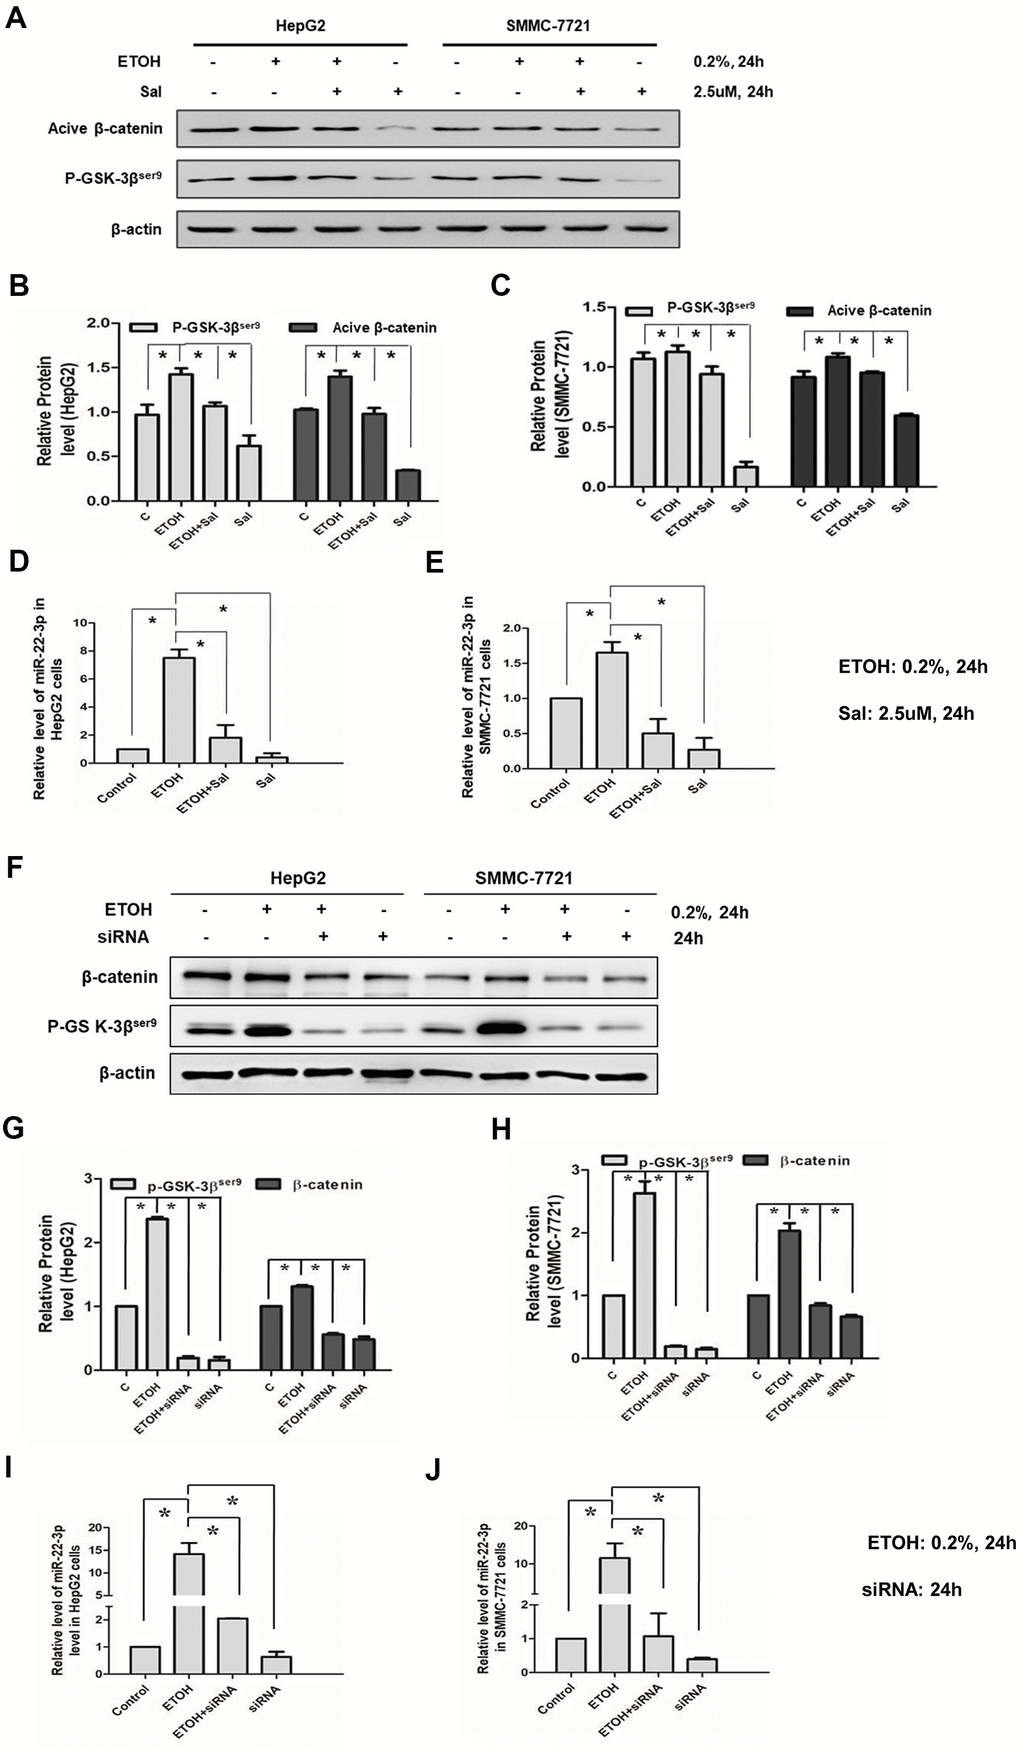 Effects of salinomycin/ β-catenin siRNA and alcohol exposure on β-catenin signaling and miR-22-3p. (A) The effect of salinomycin and alcohol exposure on β-catenin signaling in HepG2 or SMMC-7721 cells. (B) The protein levels of p-GSK-3βser9 and active β-catenin in HepG2 cells were qualified and shown in column graph. *PC) The protein levels of p-GSK-3βser9 and active β-catenin in SMMC-7721 cells were qualified and shown in column graph. *PD) The effect of salinomycin and alcohol exposure on miR-22-3p in HepG2 cells. *PE) The effect of salinomycin and alcohol exposure on miR-22-3p in SMMC-7721 cells. *PF) The effect of β-catenin siRNA and alcohol exposure on β-catenin signaling in HepG2 or SMMC-7721 cells. (G) The protein levels of p-GSK-3βser9 and active β-catenin in HepG2 cells were qualified and shown in column graph. *PH) The protein levels of p-GSK-3βser9 and active β-catenin in SMMC-7721 cells were qualified and shown in column graph. *PI) The effect of β-catenin siRNA and alcohol exposure on miR-22-3p in HepG2 cells. *PJ) The effect of β-catenin siRNA and alcohol exposure on miR-22-3p in SMMC-7721 cells. *P